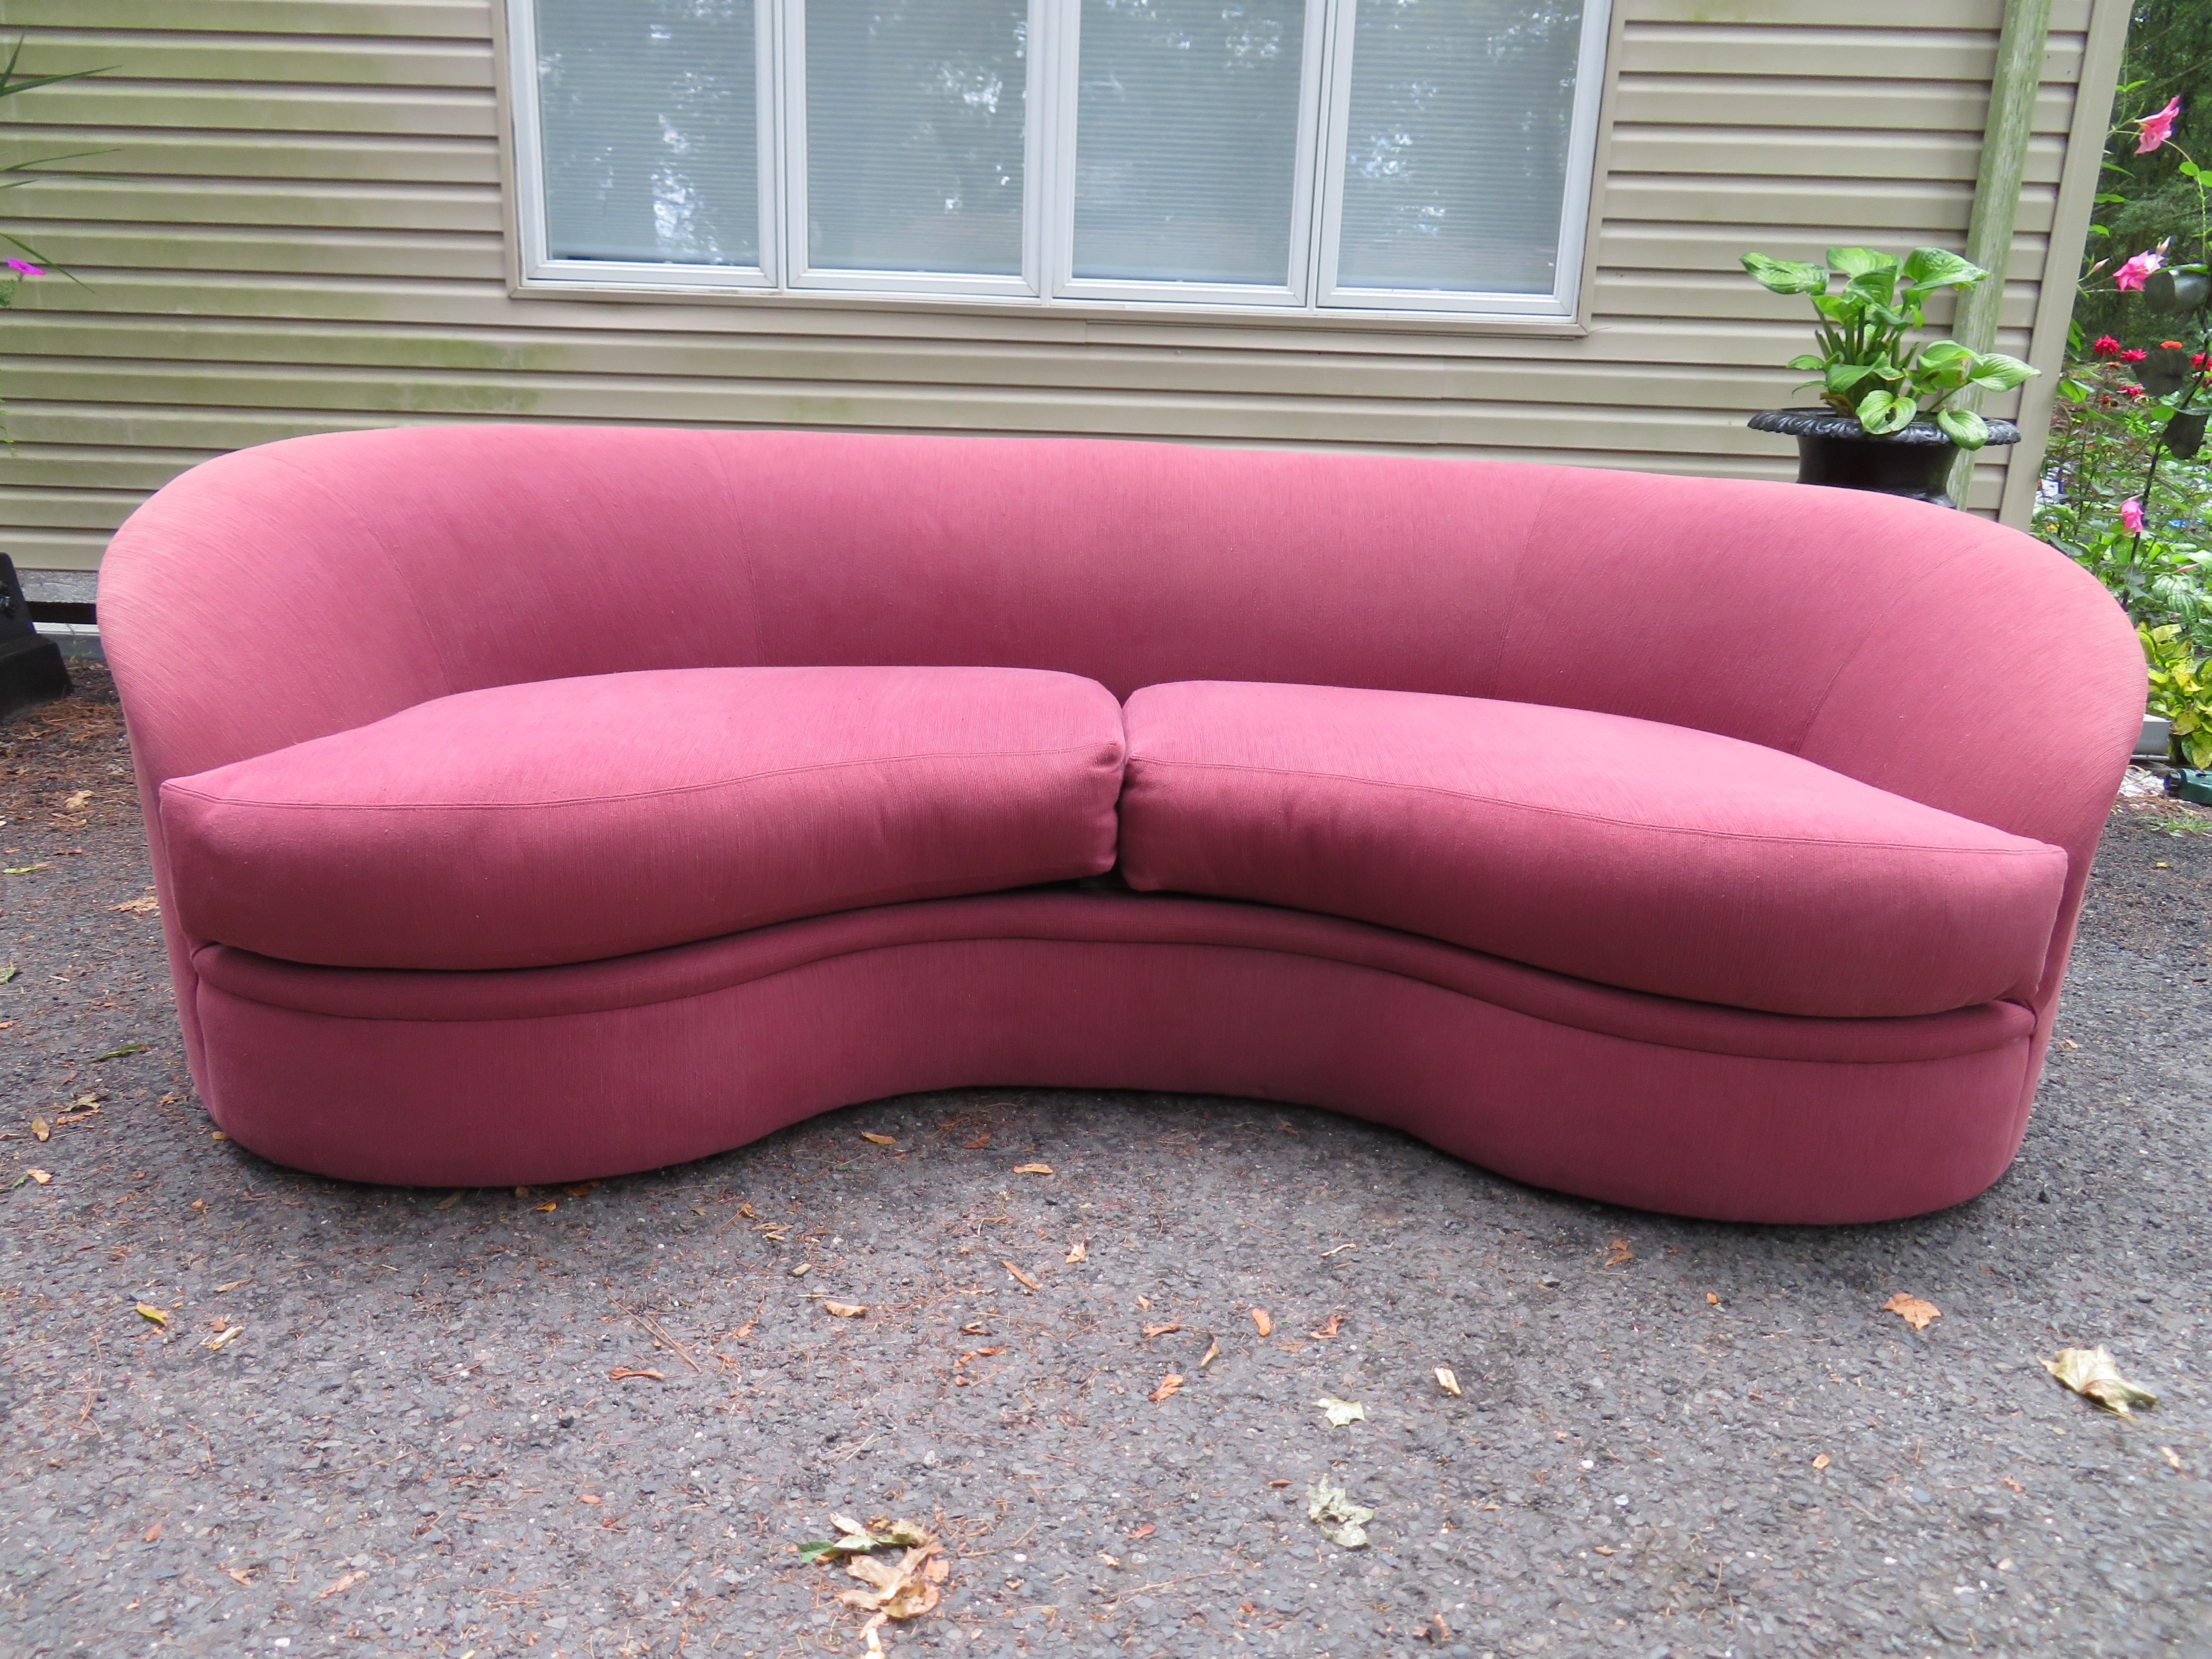 Wonderful biomorphic kidney bean shaped sofa with Directional label-Vladimir Kagan style. This piece retains its original upholstery which shows a bit of wear-some fading and minor spots. As with all original upholstery we do recommend re-upholstery